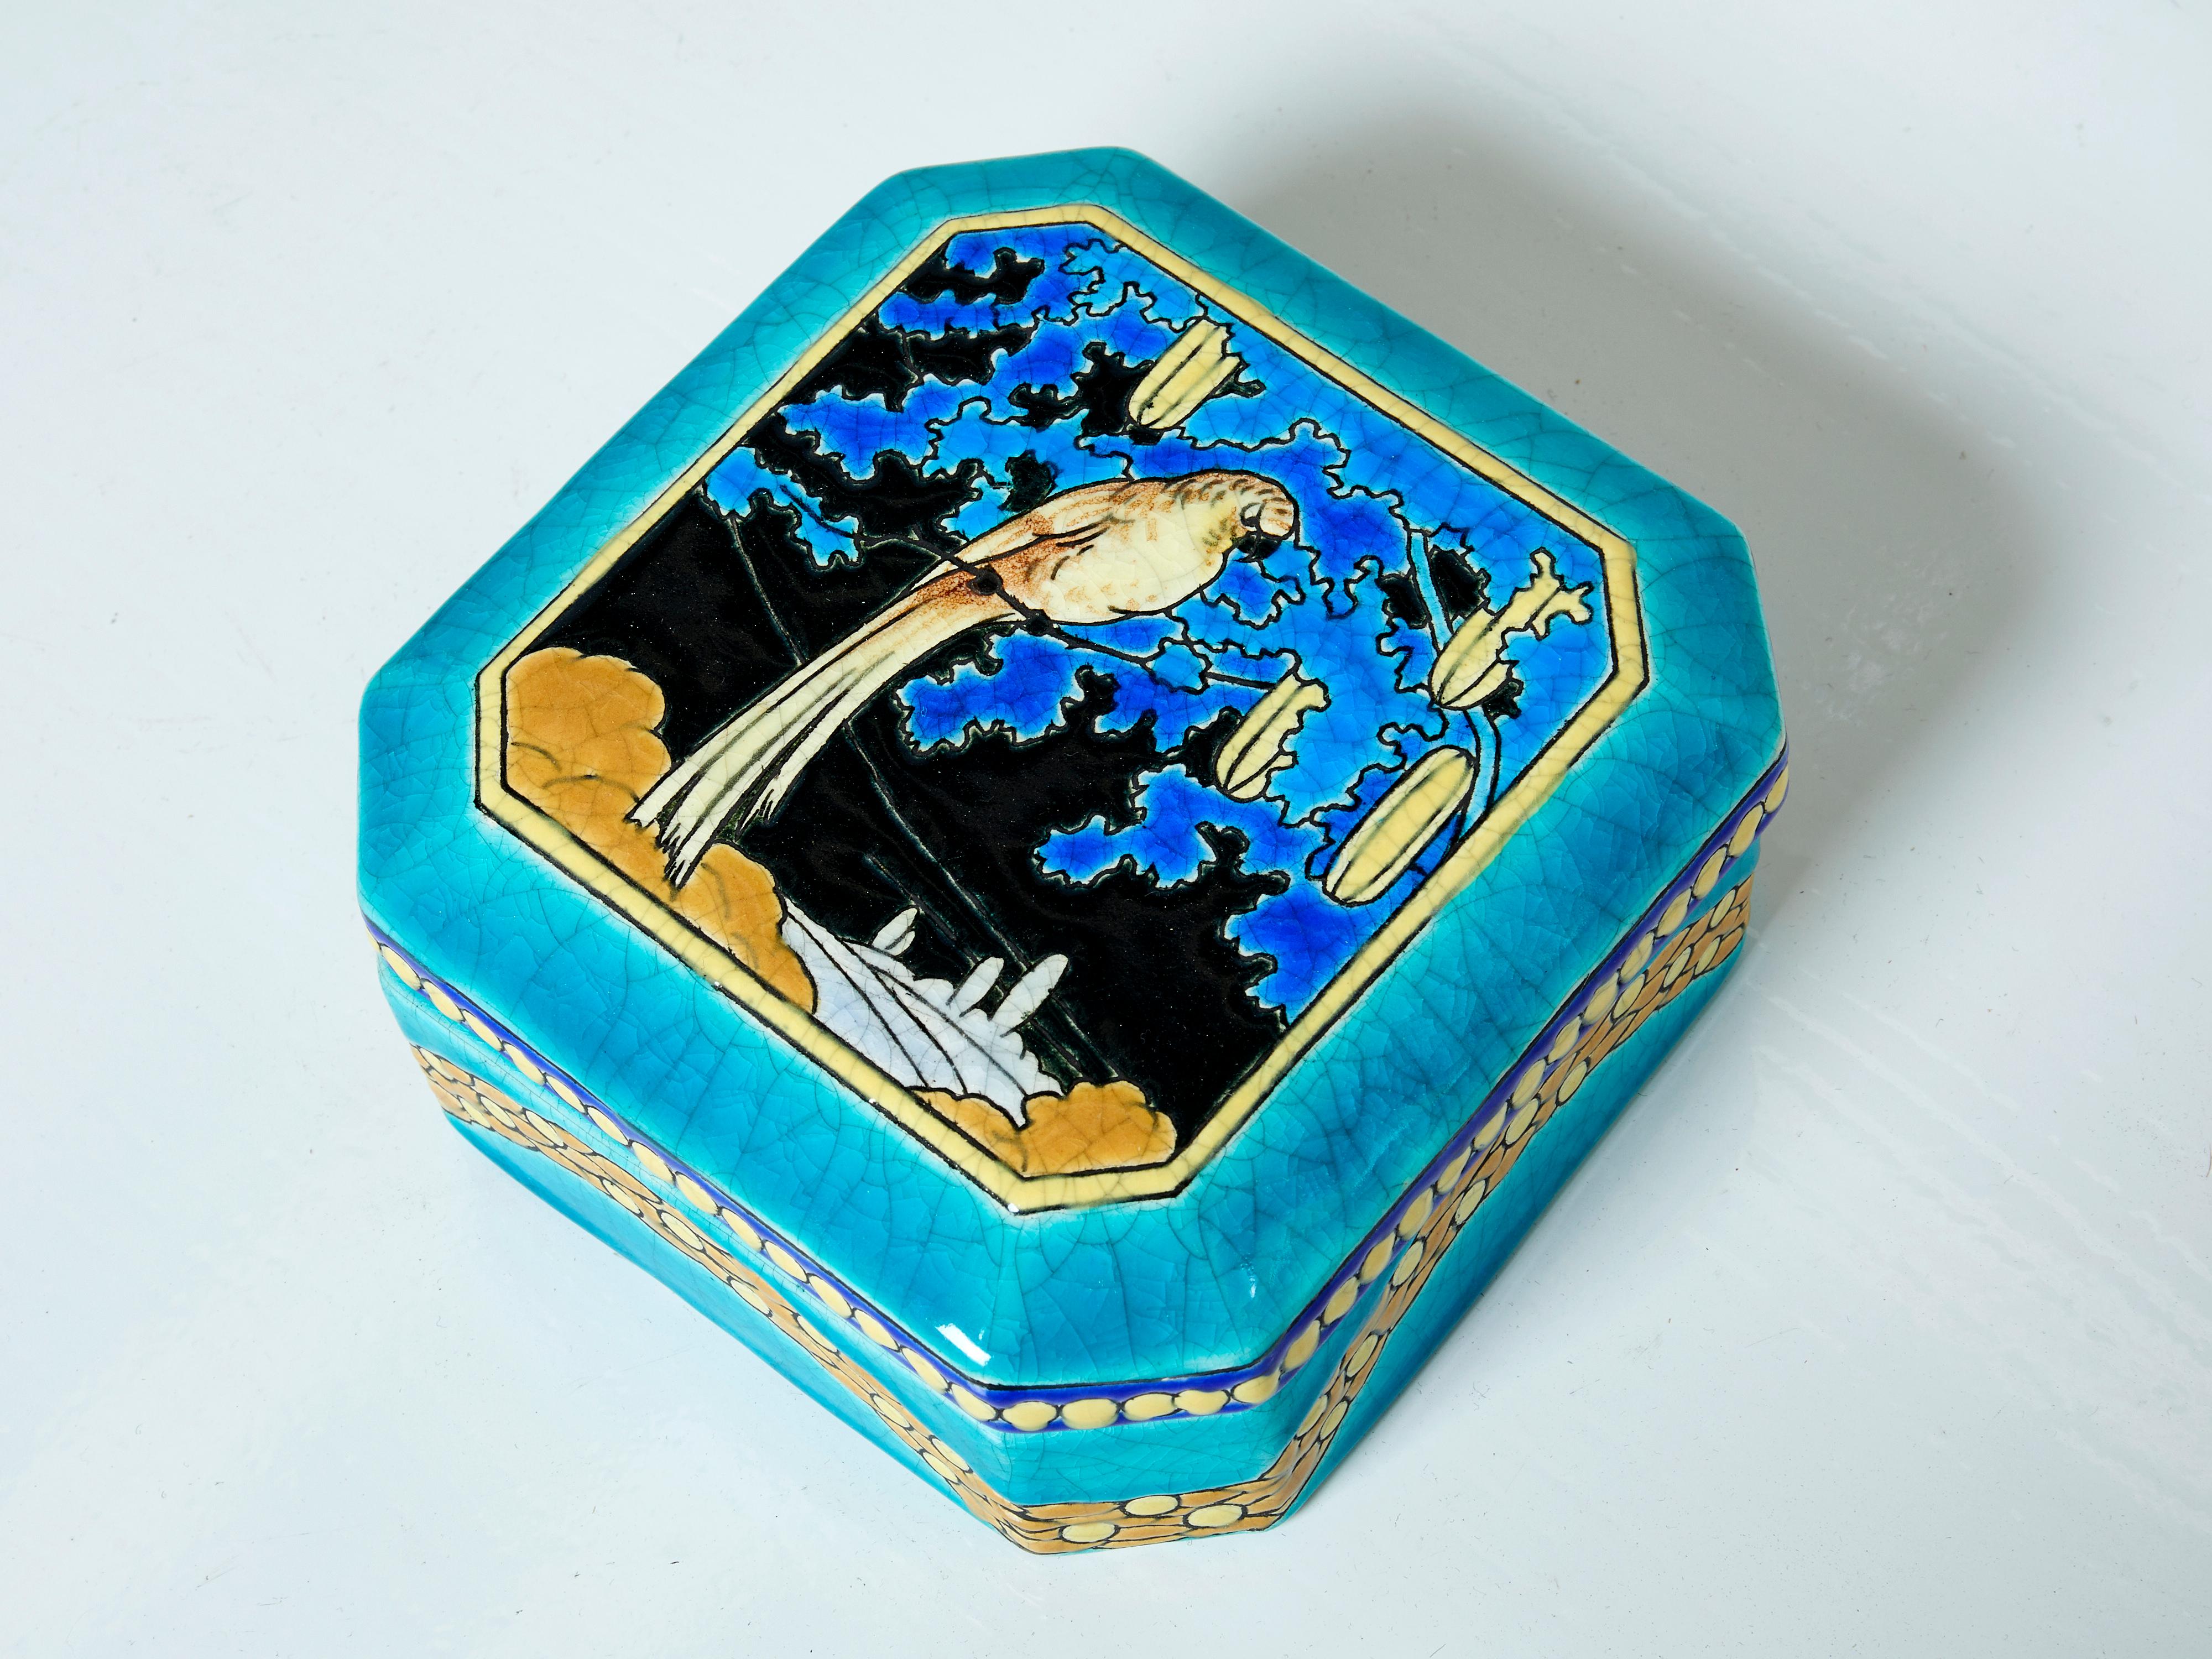 Rare large ceramic Art deco square box by Faïenceries et Emaux de Longwy made around 1925. The bright and bold turquoise enamelled cloisonné Chinoiserie design features a beautiful parrot surrounded by foliage. The blue ground features Longwy's